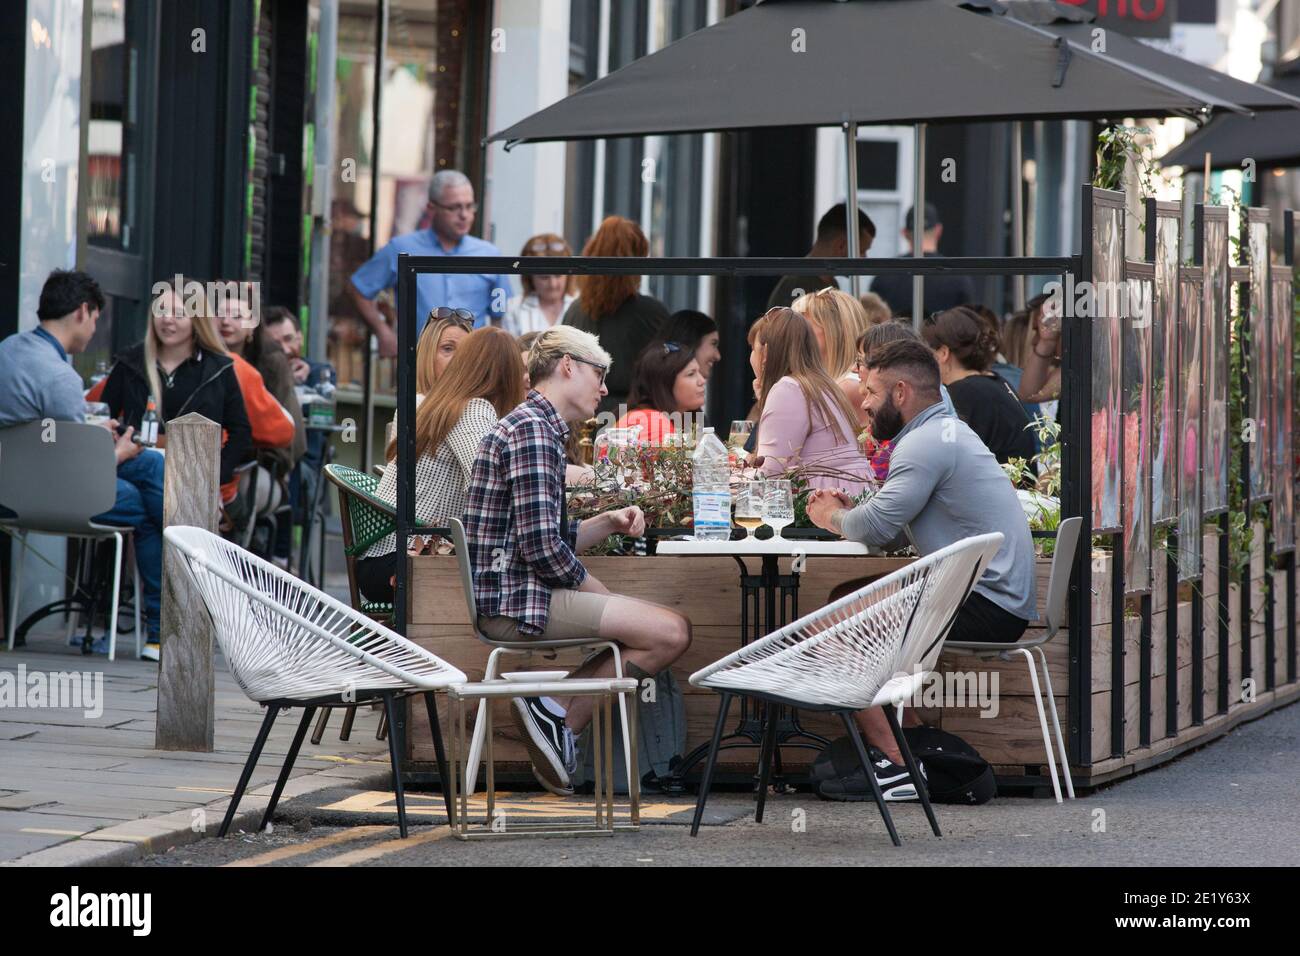 Liverpool, UK - September 19 2020: People eat outside in Liverpool city centre before local lockdown restrictions come into effect on Tuesday. Stock Photo